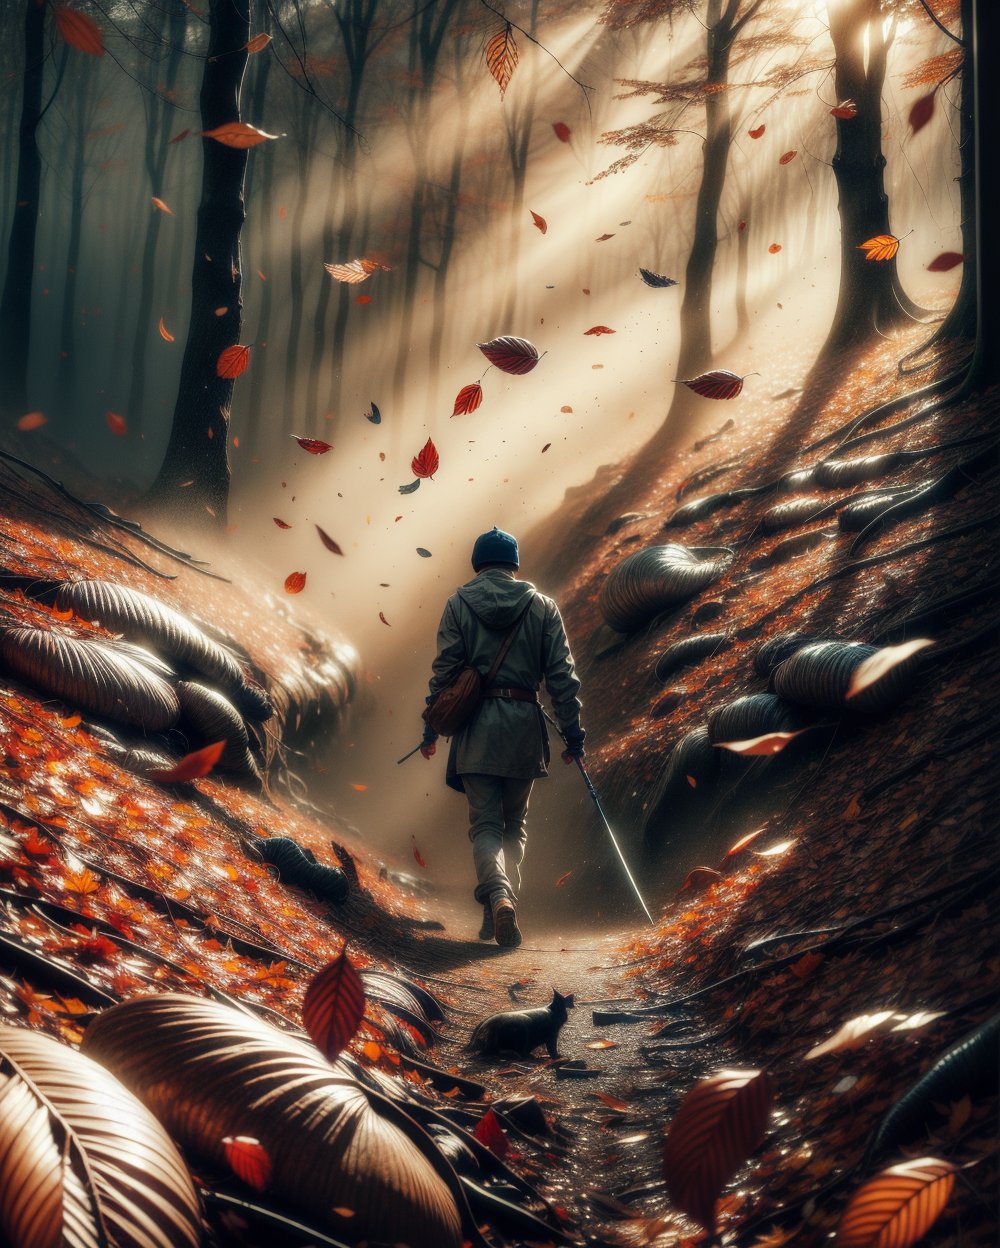 realistic image, vintage style picture, half_body, 1man, dinamic_pose, black ninja walking in forest, autumn leaf drop to the ground, seround by mist, gritty, dusty, fantastical, photohyperrealistic, highly detailed, hyper realistic, with dramatic polarizing filter, sharp focus, HDR, UHD, 64K, 16mm, color graded portra 400 film, remarkable color, ultra realistic,,ABMautumnleaf,Extremely Realistic